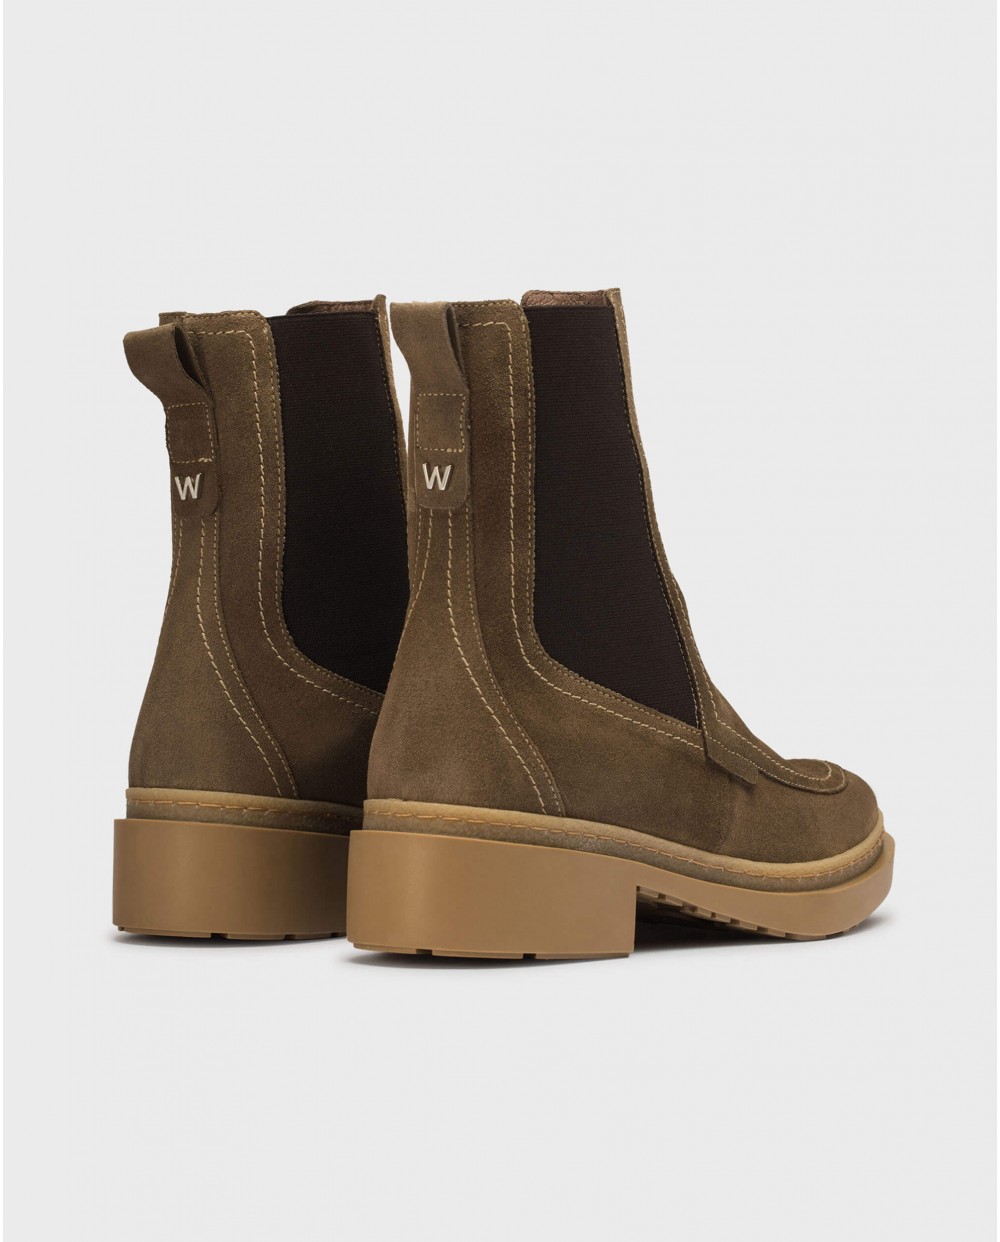 Wonders-Ankle Boots-Brown Kenny ankle boot